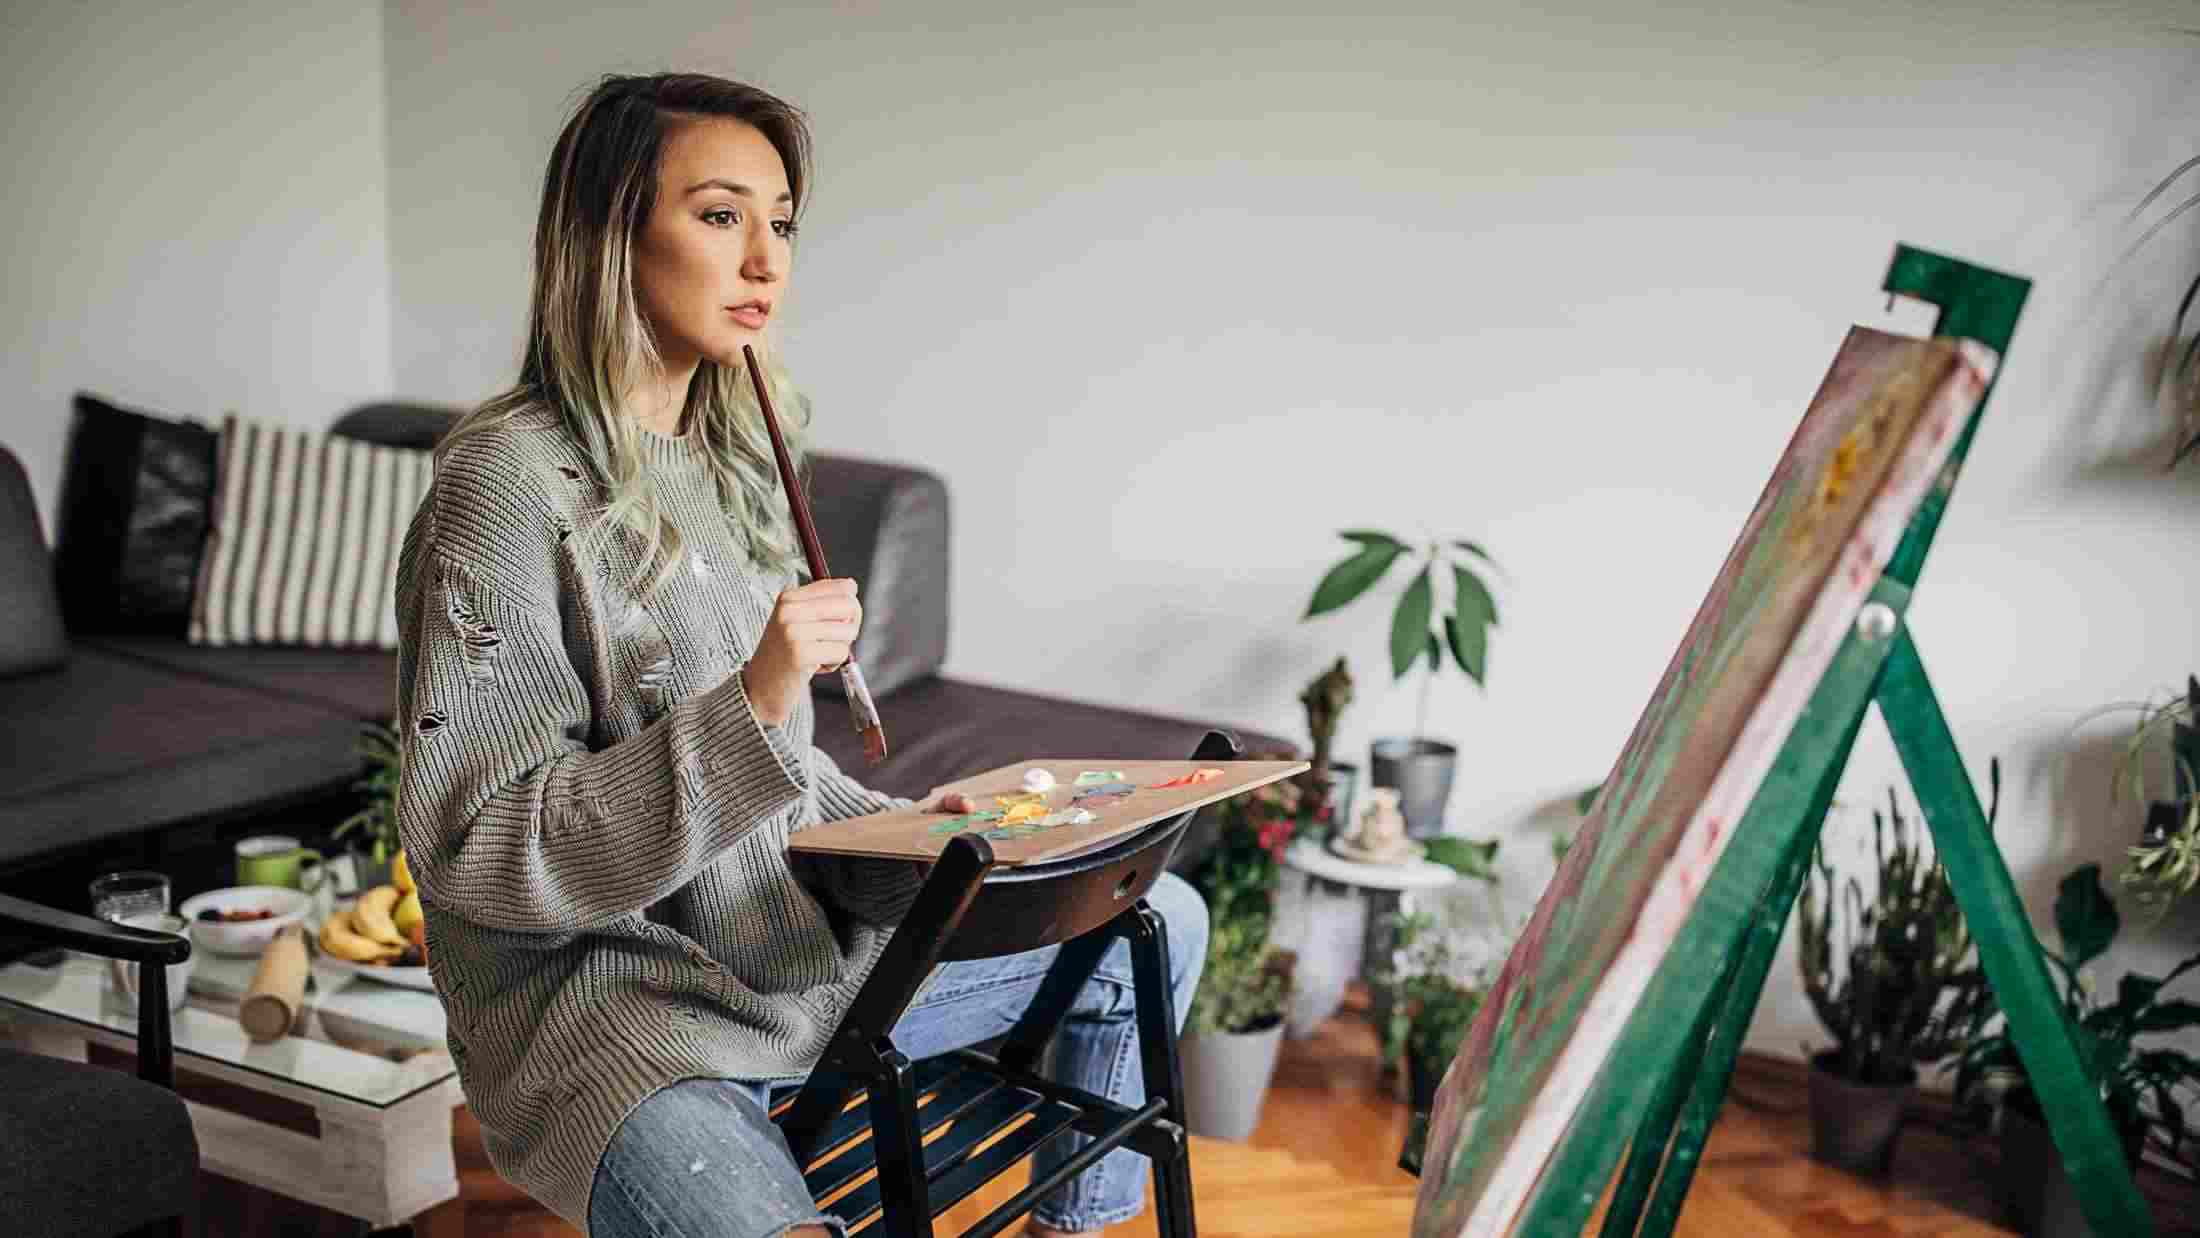 Female painter sat on a chair holding a paint brush while looking at a canvas